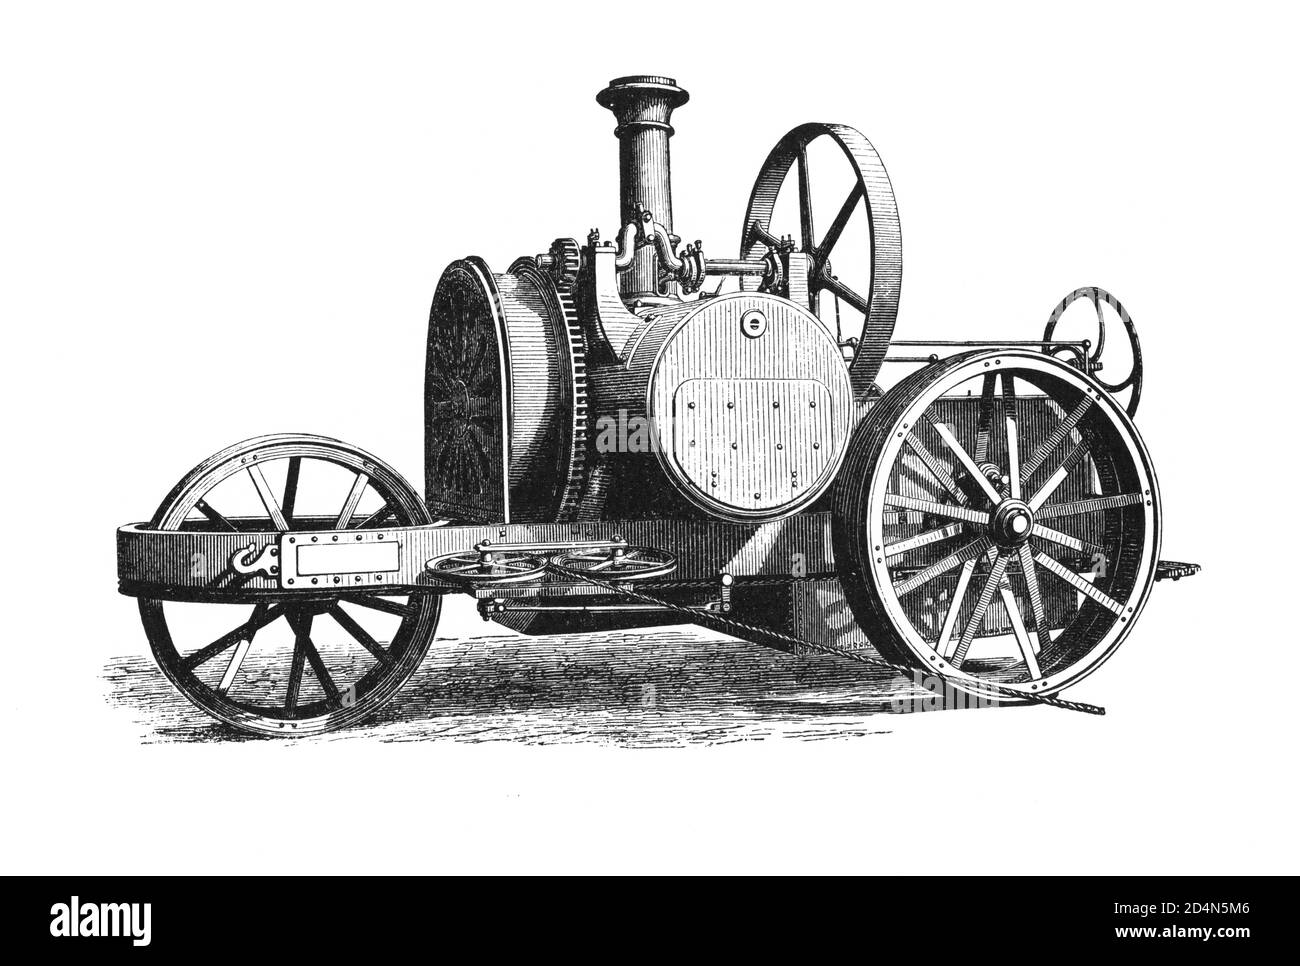 Antique Agricultural Farming Equipment - Vintage Farmers Tools and Machines from 19th century Original Art Antique Illustration Black and White Stock Photo